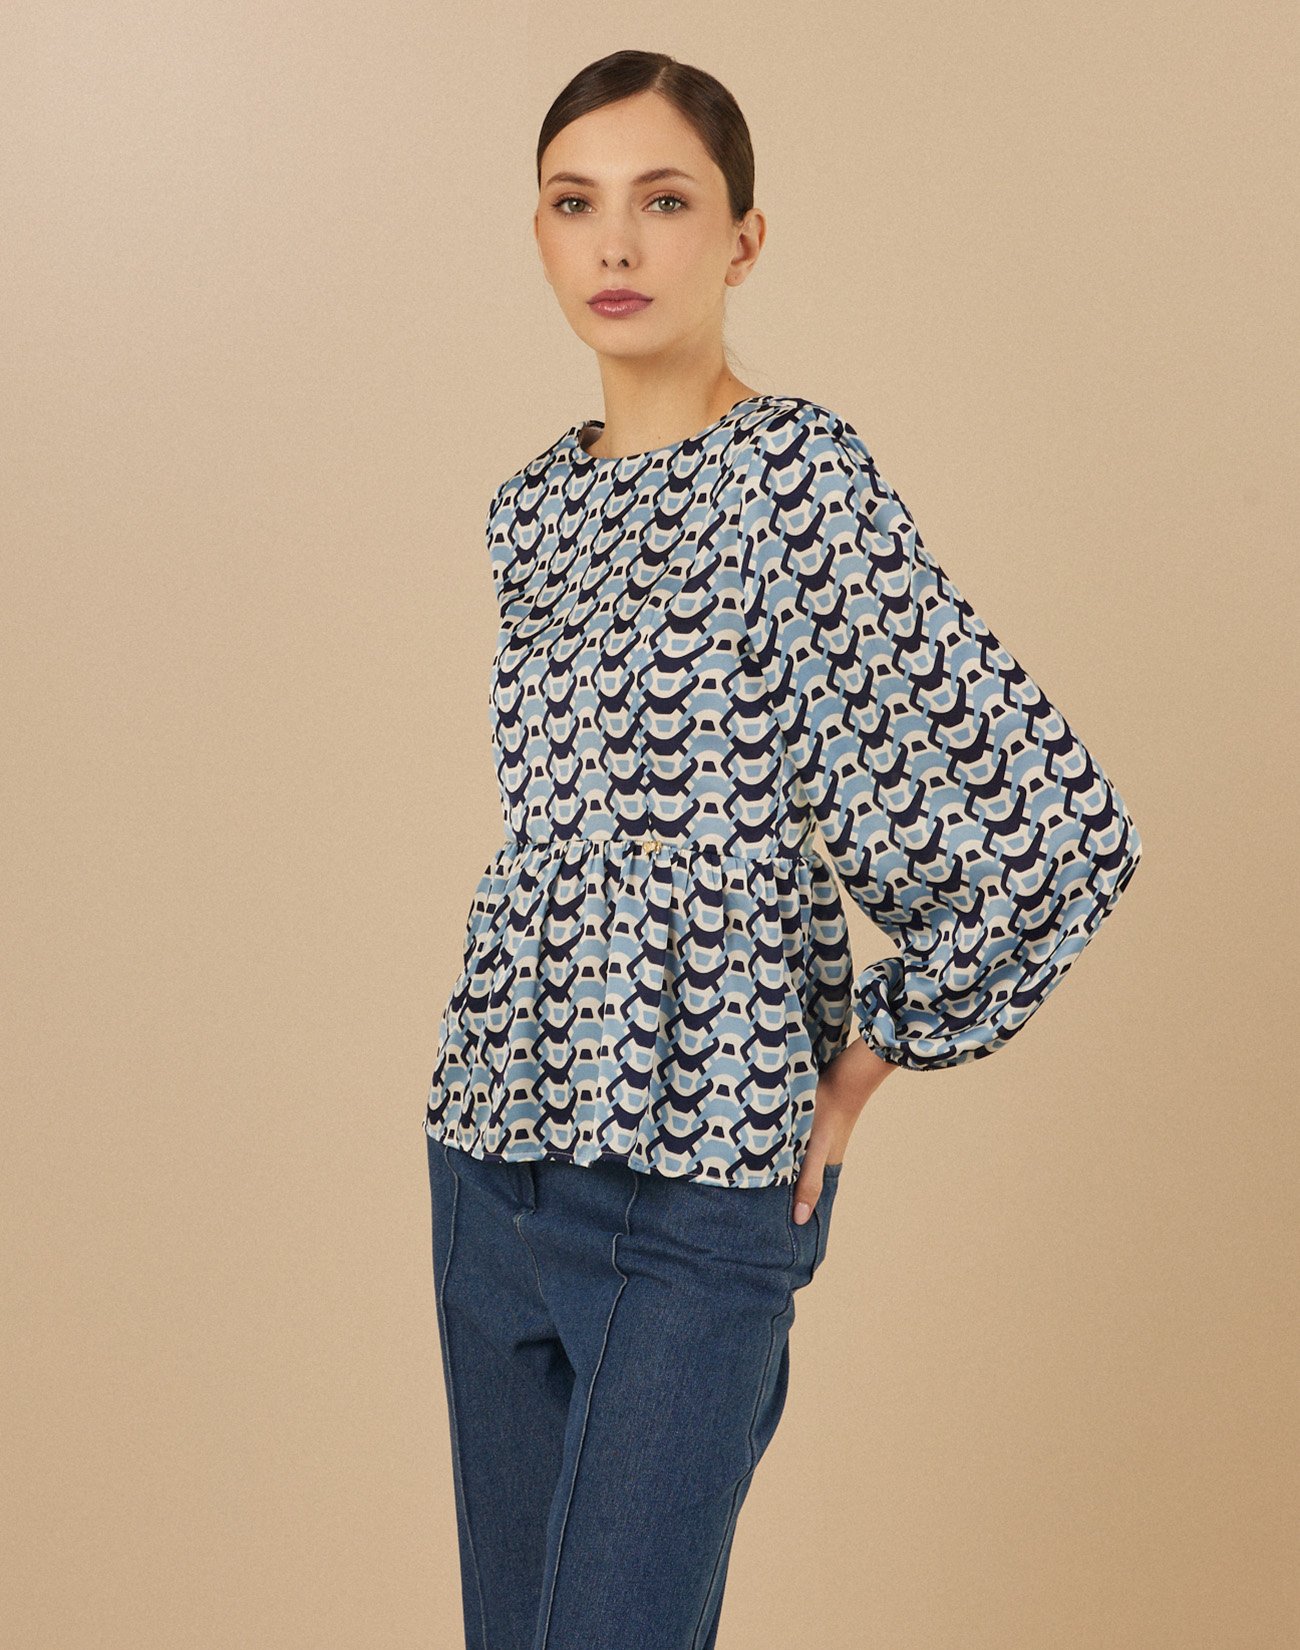 Printed blouse with pads